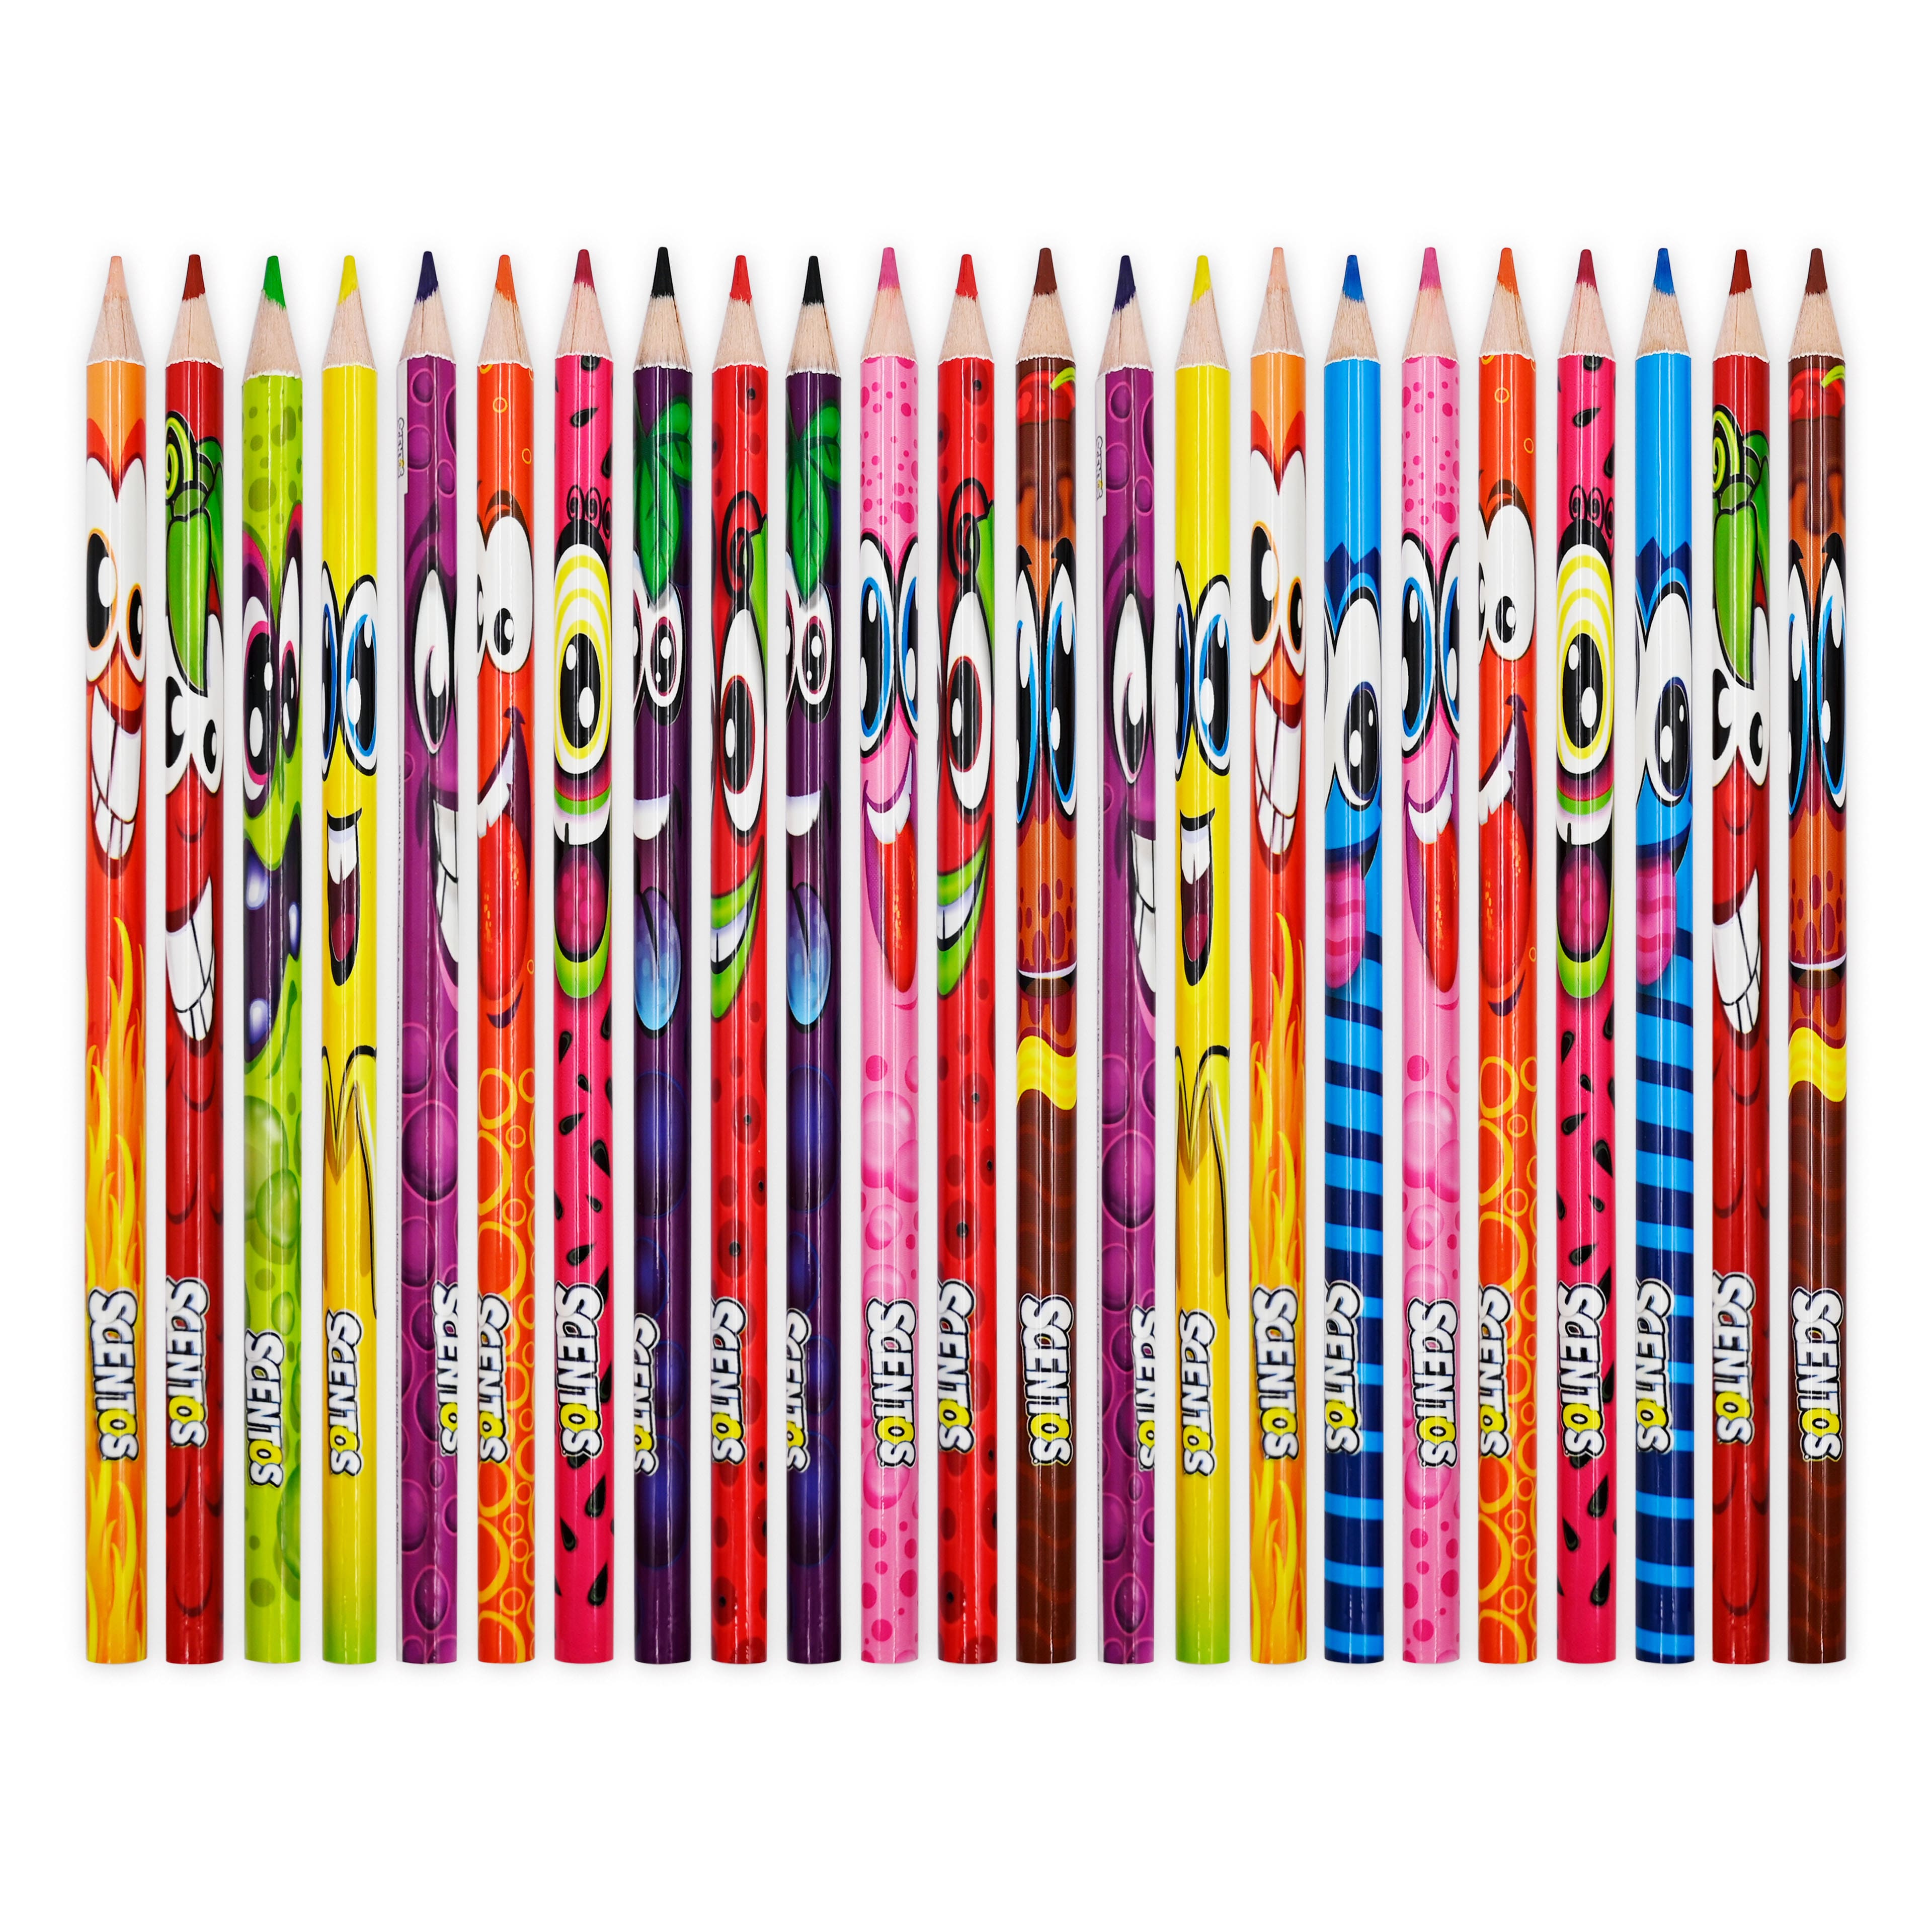  Scentos Scented Colored Pencils for Kids - Scratch N' Sniff -  Color Pencil Set - For Ages 3 and Up - 24 Pack : Toys & Games